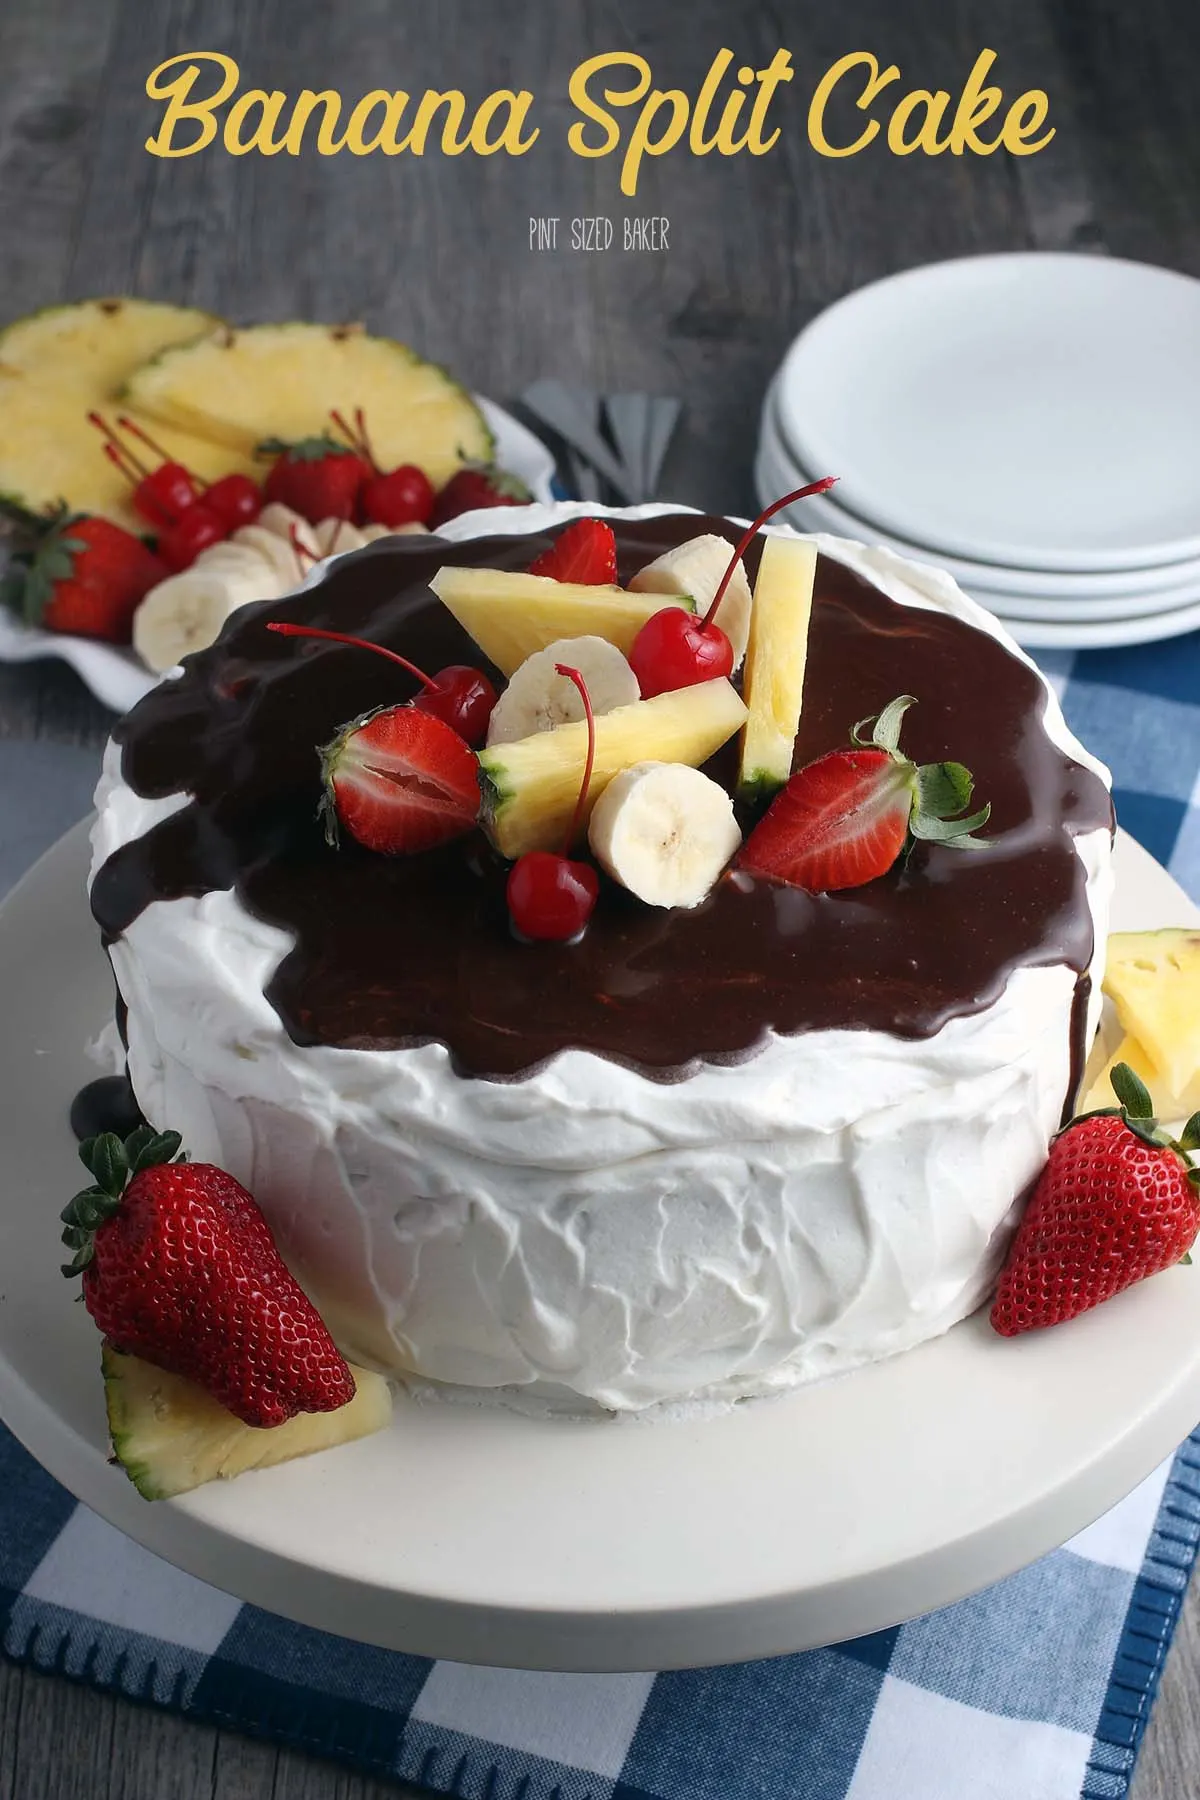 Making this recipe for banana split cake is simple! I'll show you how to make banana split cake, the perfect easy dessert recipe.